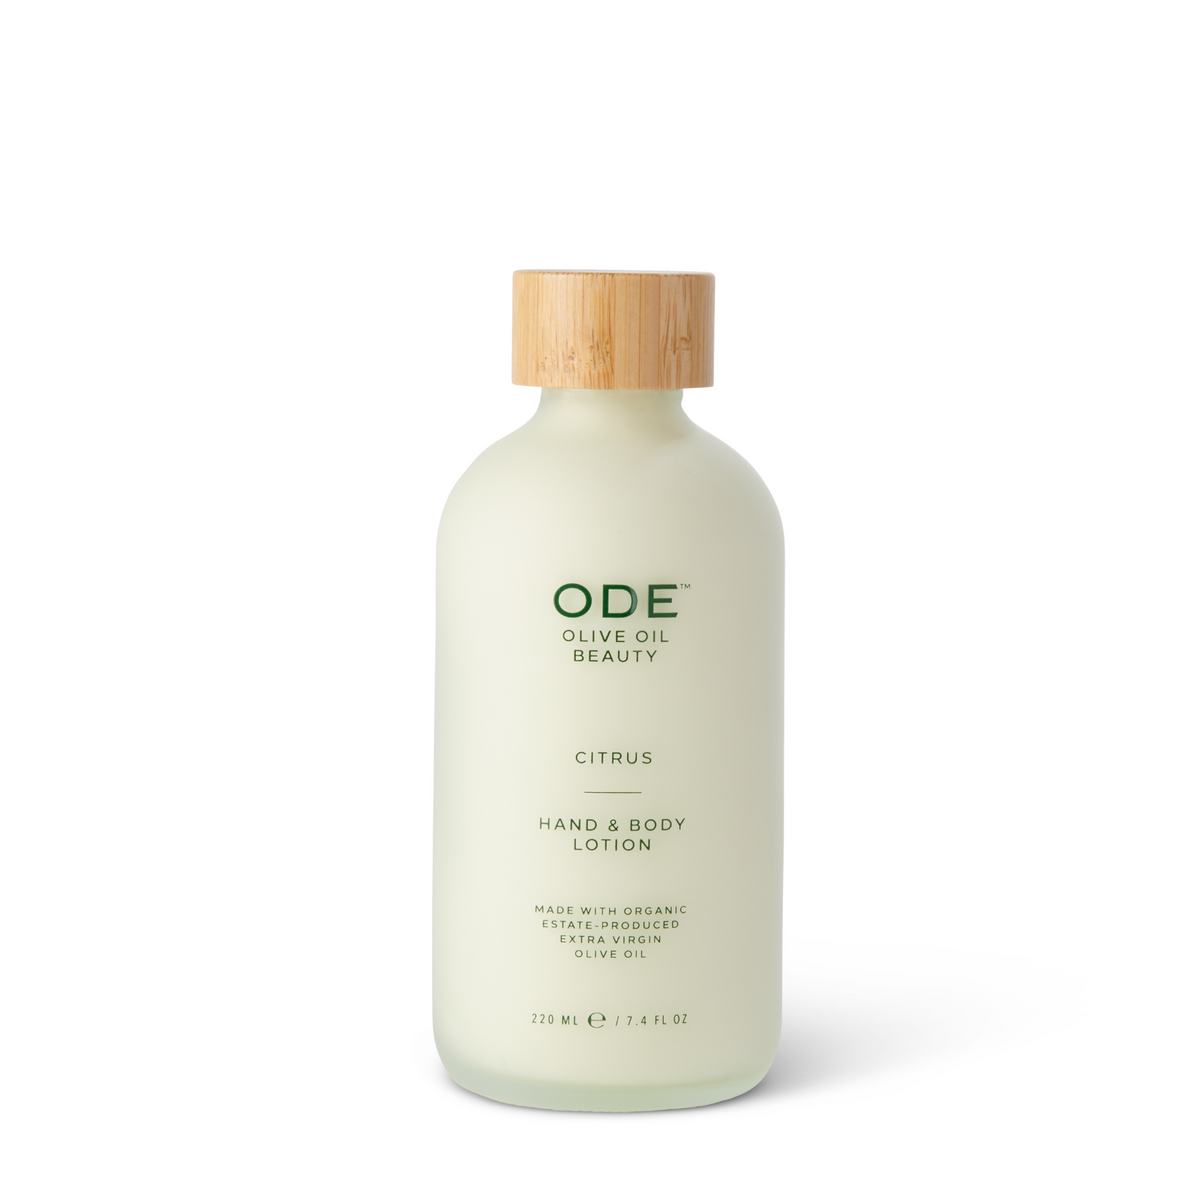 display_different_collection|ode-olive-oil-beauty-scents-citrus